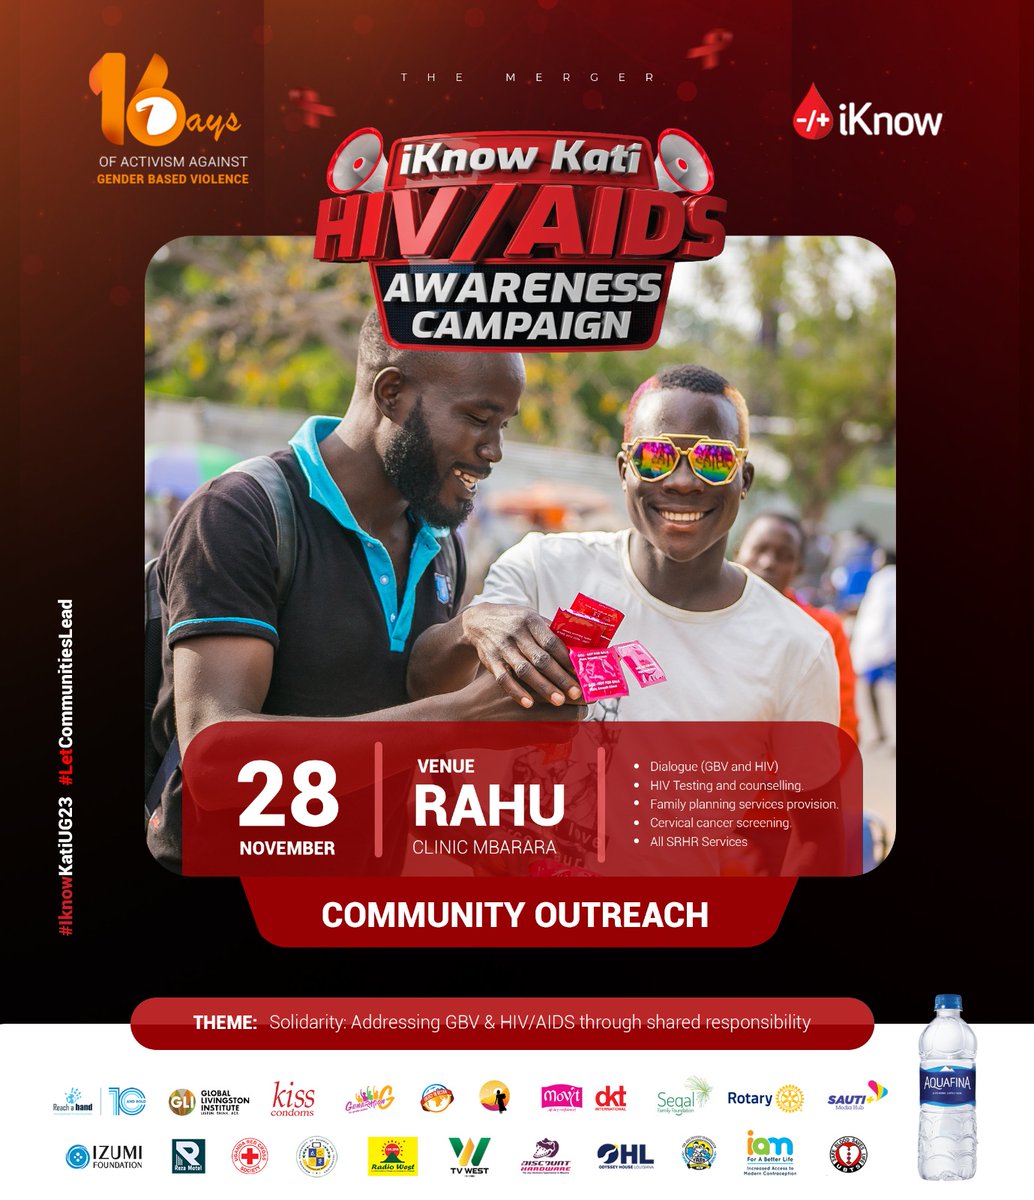 At the RAHU Clinic in Mbarara, we're fostering a community of health and awareness. 

Dialogues on GBV and HIV take center stage, alongside vital services like HIV testing, family planning, and cervical cancer screening #iknowkatiUG #16DaysOfActivism